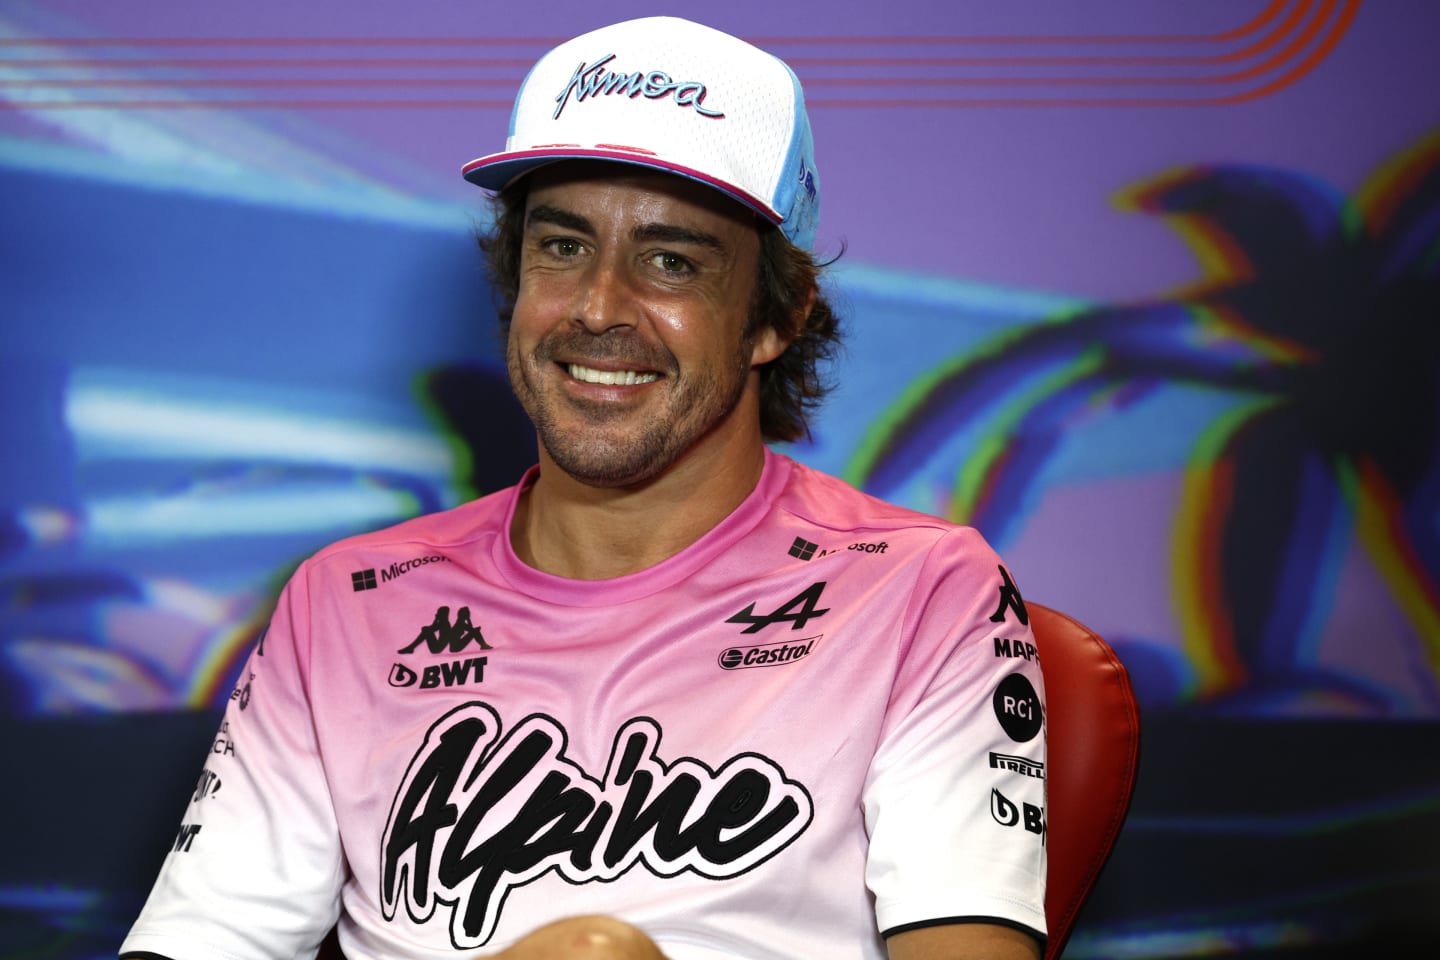 MIAMI, FLORIDA - MAY 06: Fernando Alonso of Spain and Alpine F1 talks in the Drivers Press Conference prior to practice ahead of the F1 Grand Prix of Miami at the Miami International Autodrome on May 06, 2022 in Miami, Florida. (Photo by Jared C. Tilton/Getty Images)